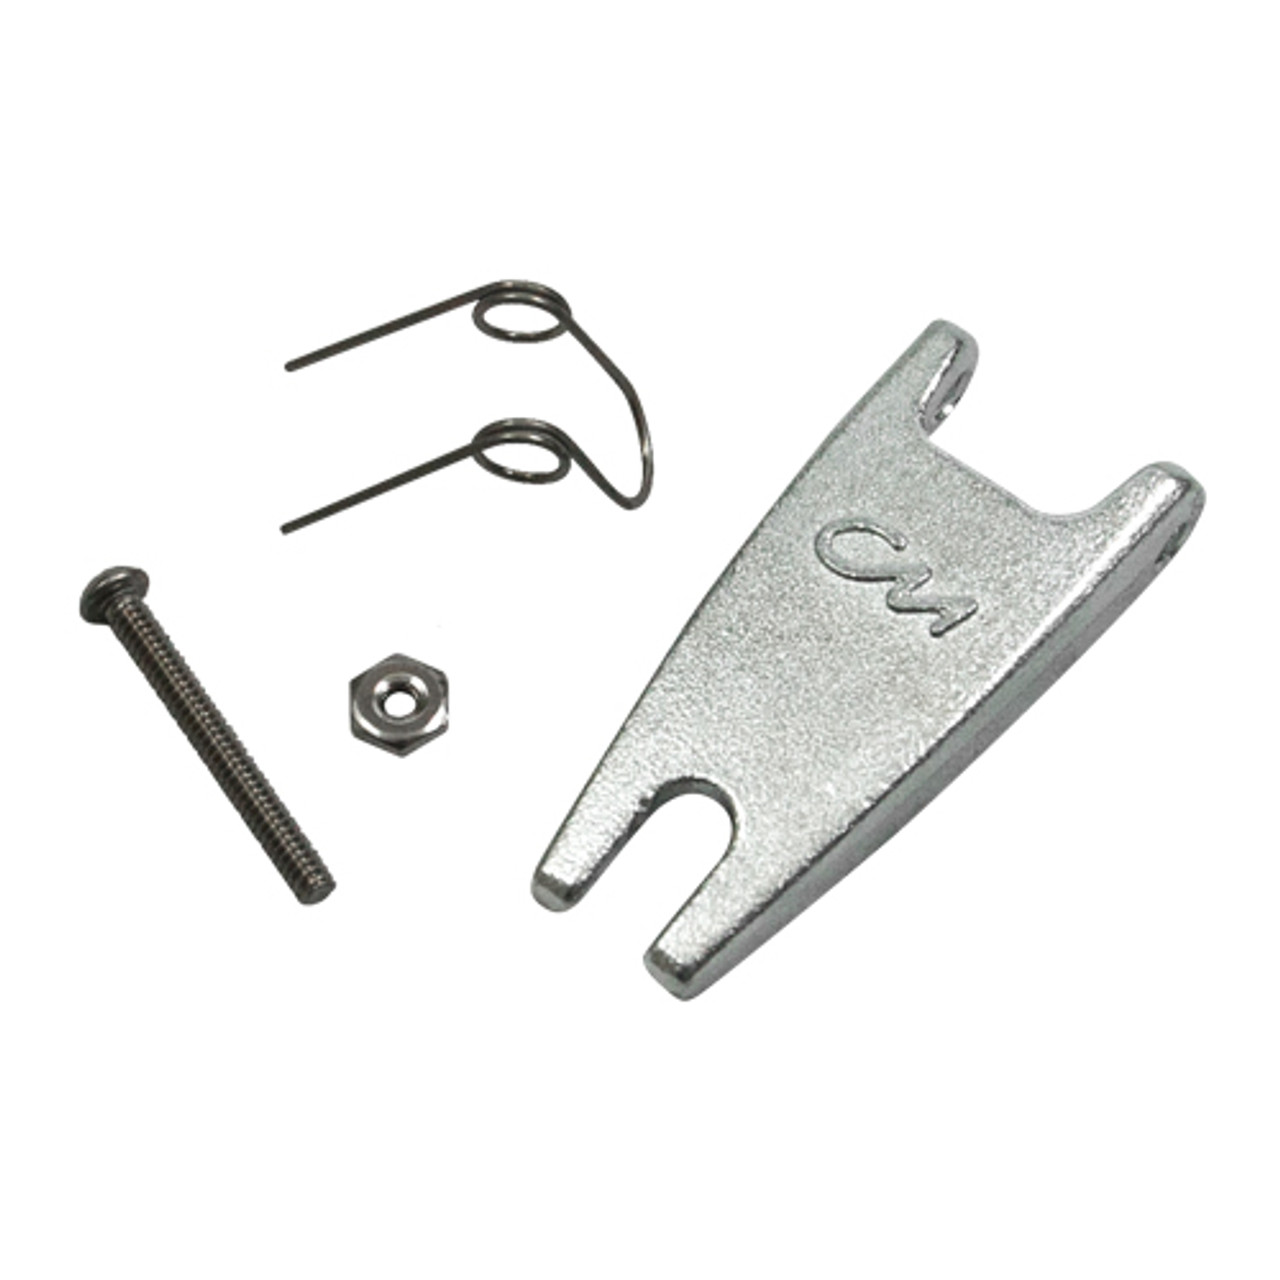 https://cdn11.bigcommerce.com/s-11cqjpjngs/images/stencil/1280x1280/products/59420/73280/cm-1-2-latch-kit-for-clevis-sling-hook-34__57609.1649102553.jpg?c=1